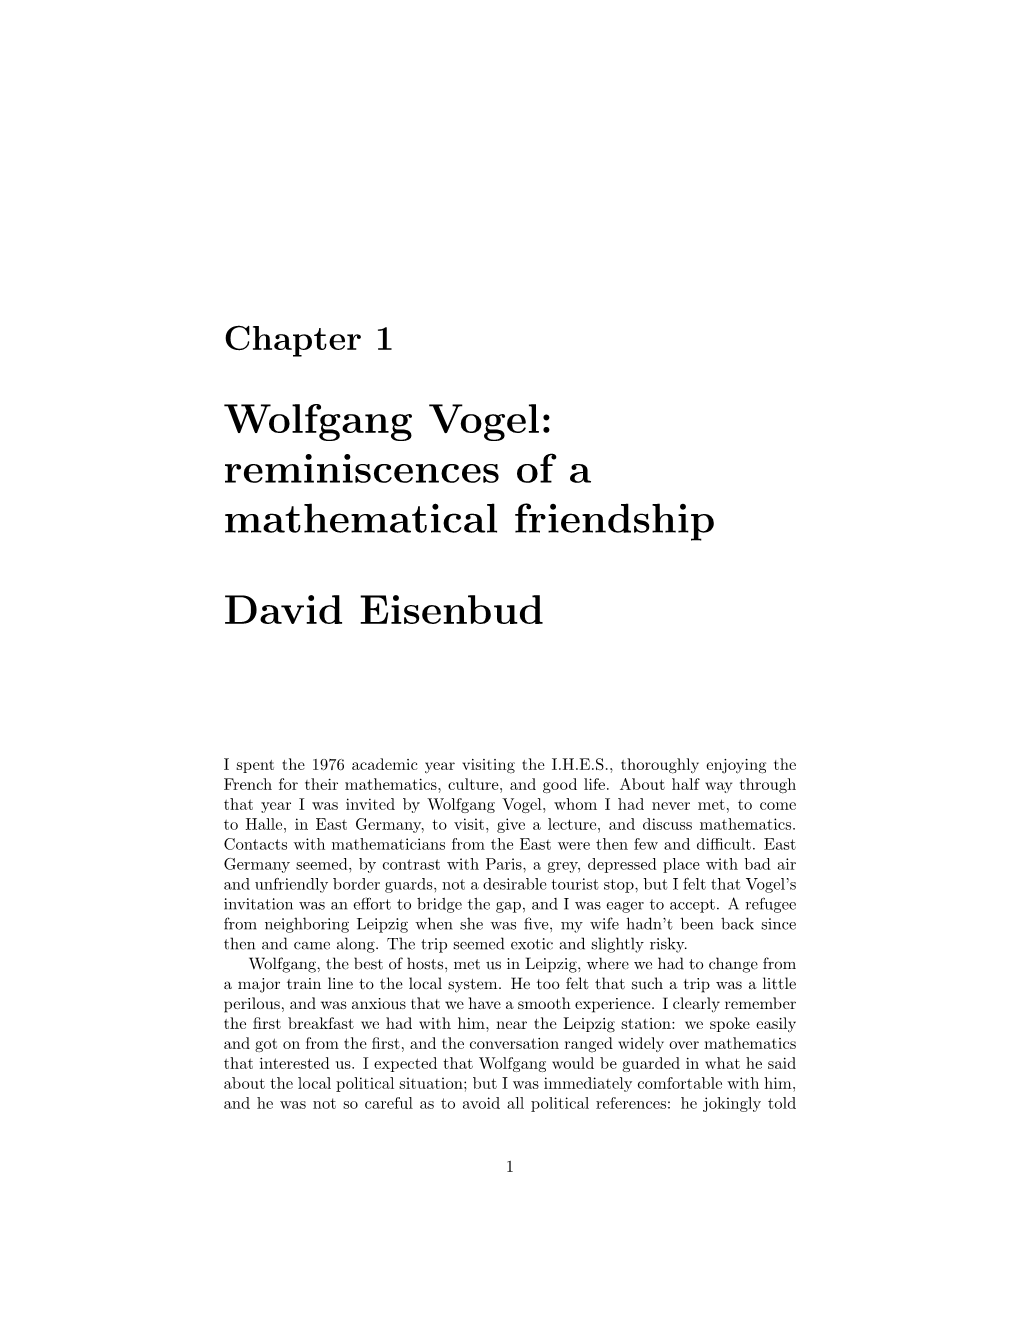 Wolfgang Vogel: Reminiscences of a Mathematical Friendship